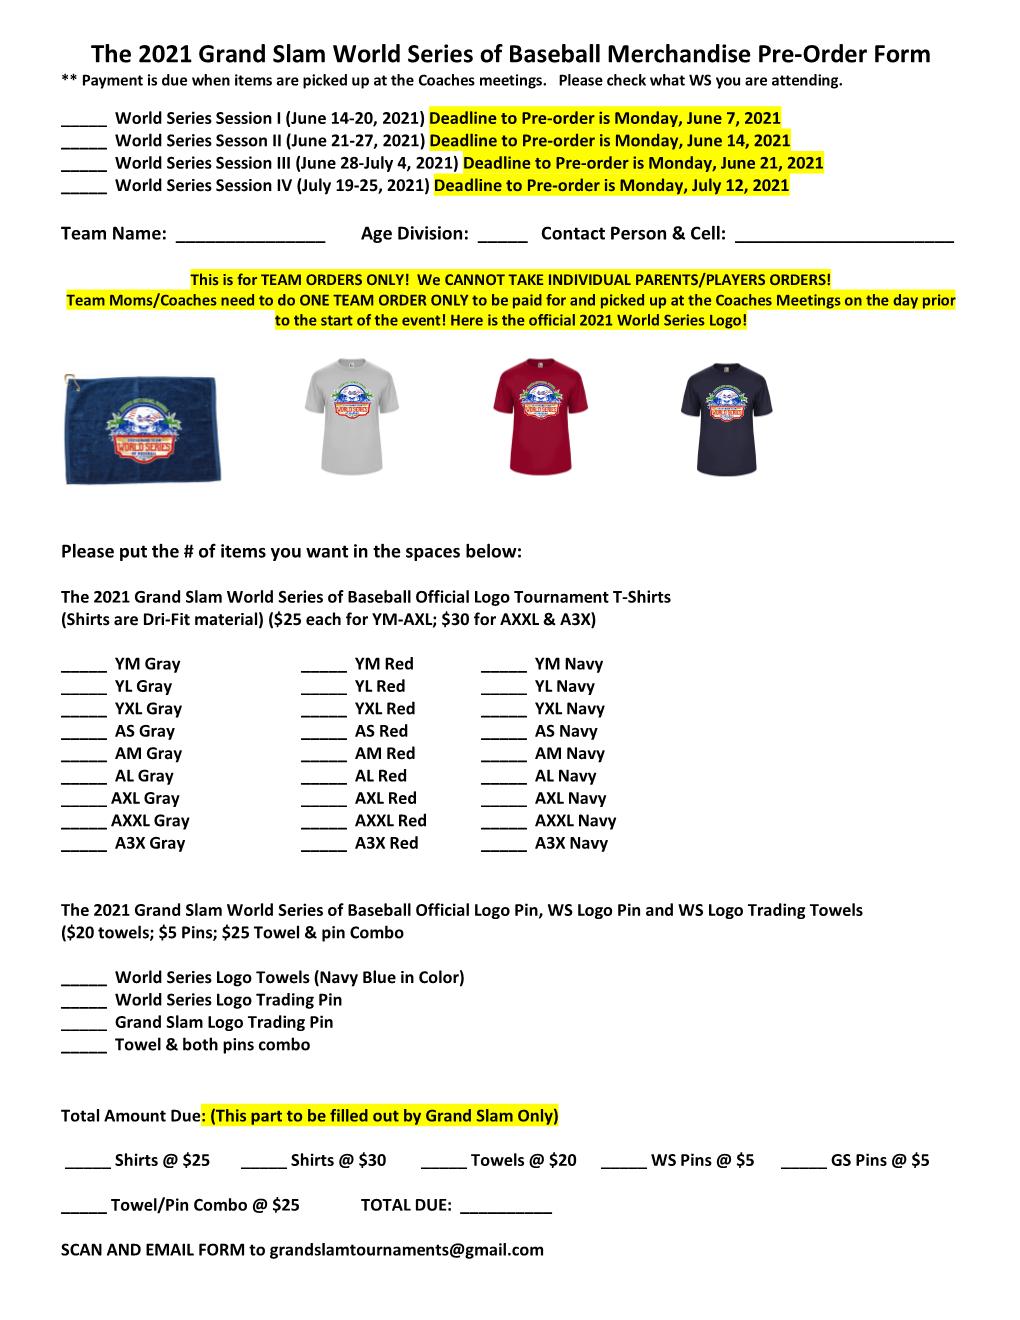 The 2021 Grand Slam World Series of Baseball Merchandise Pre-Order Form ** Payment Is Due When Items Are Picked up at the Coaches Meetings